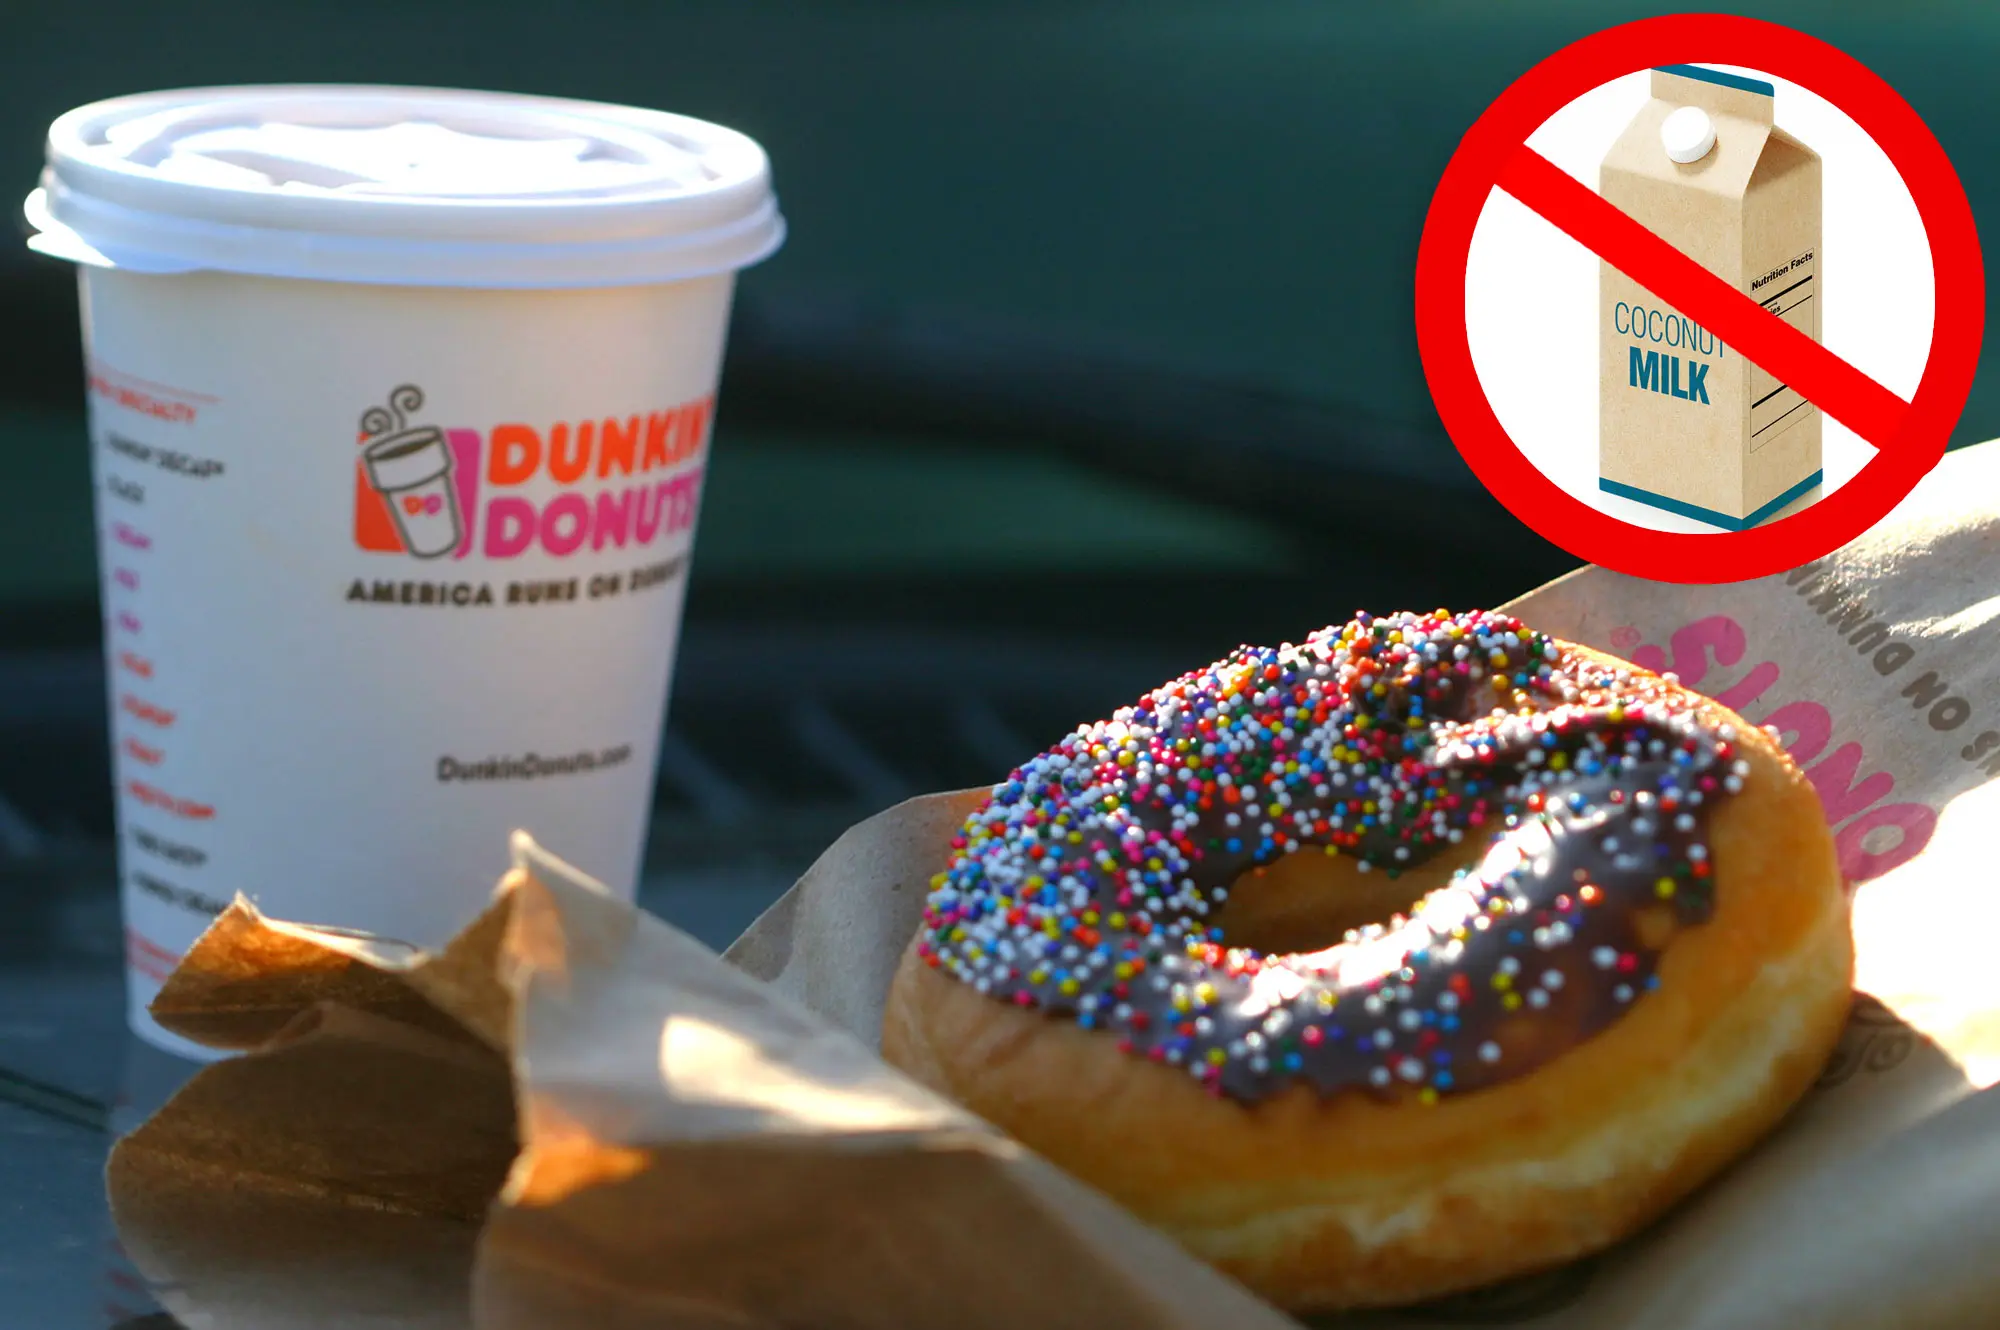 Dunkin’ Bids Farewell to Coconut Milk – What You Need to Know